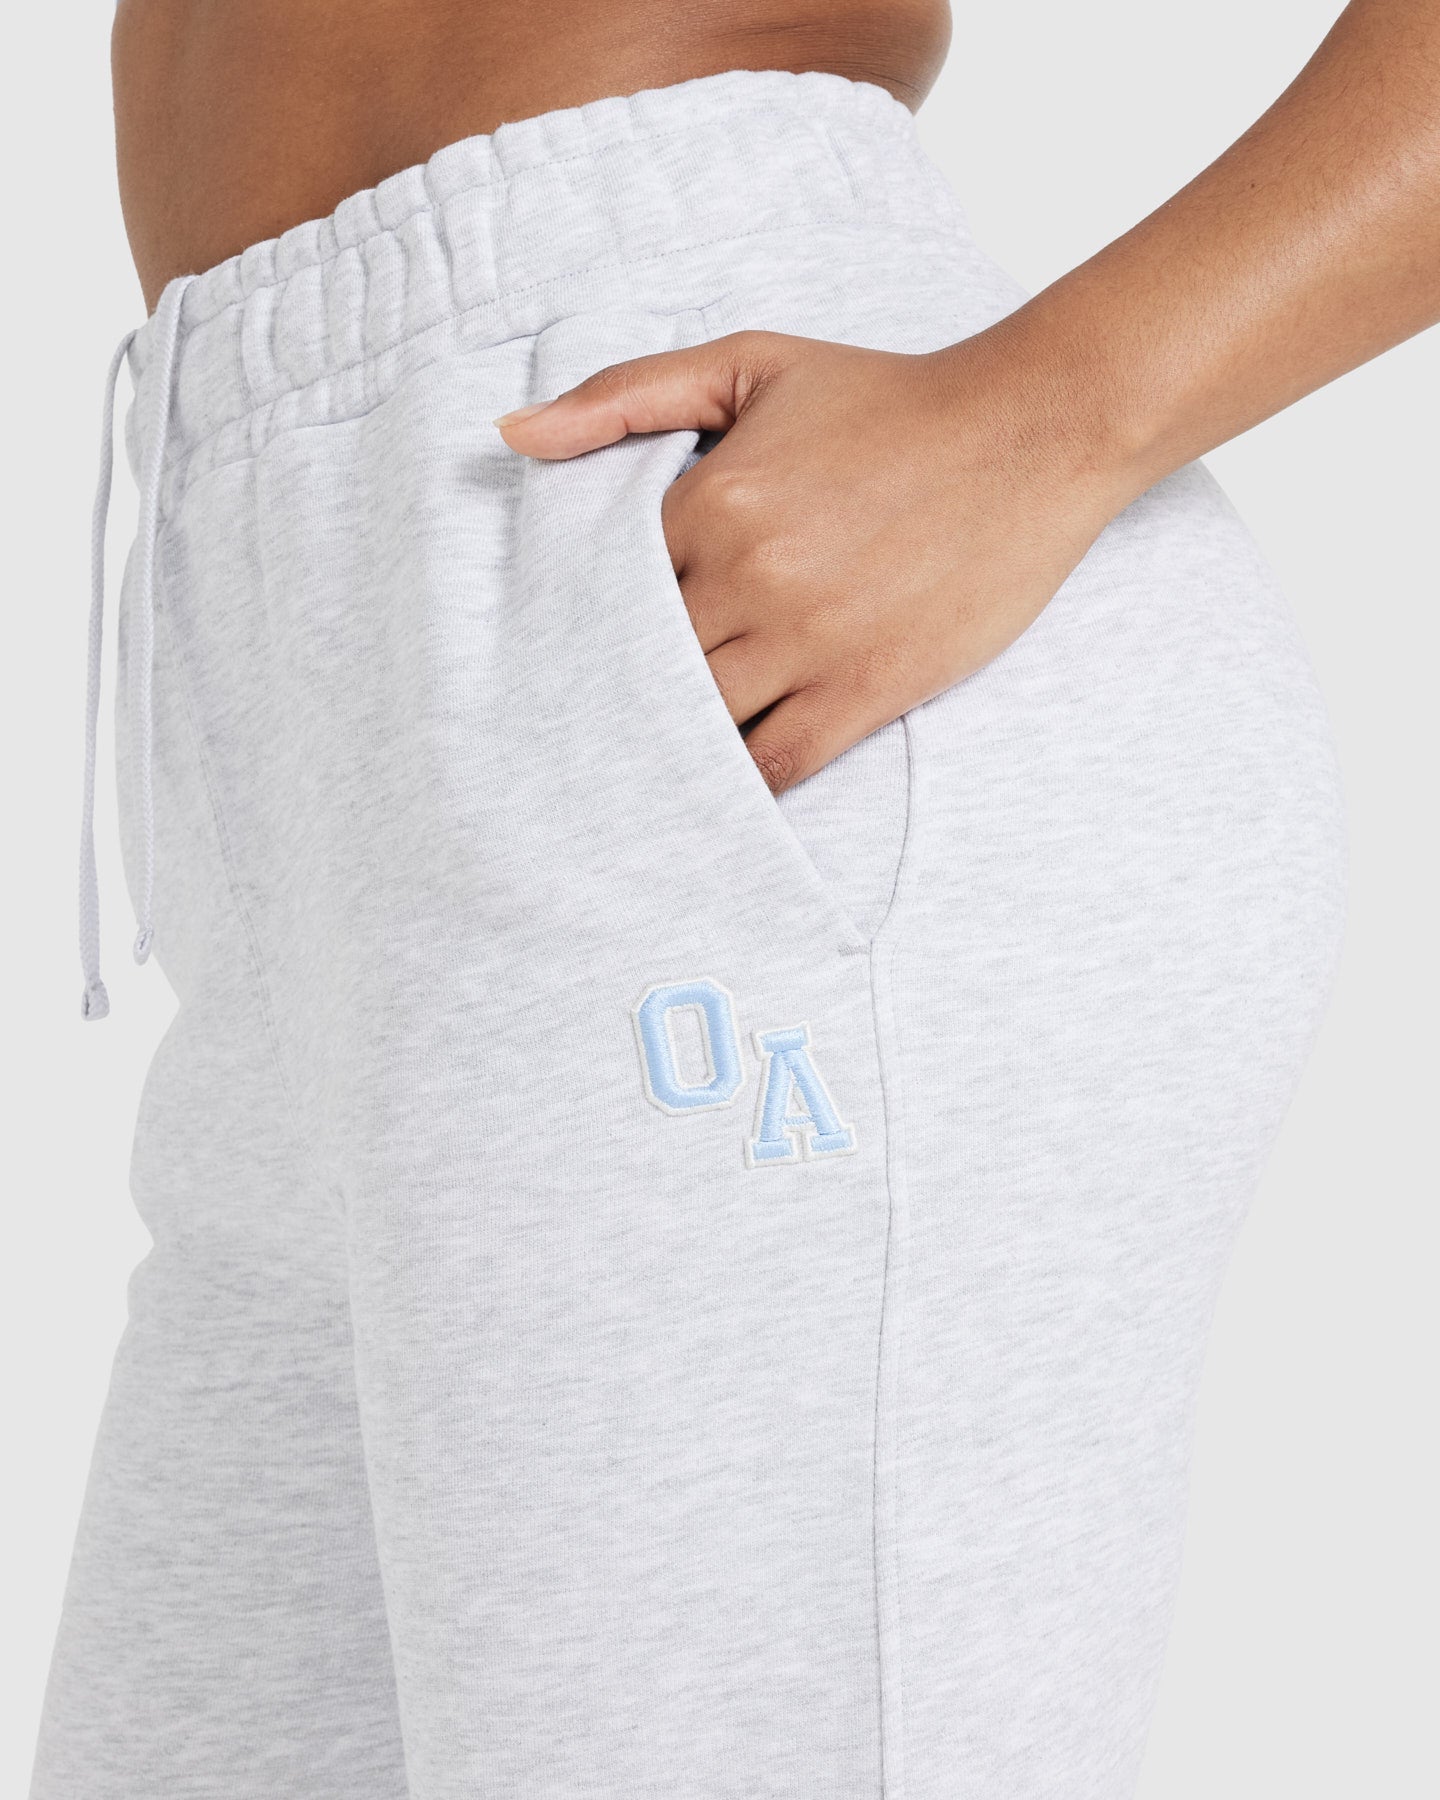 Women's “Stay Reppin'” Jogger Set – LIGHT GREY – Colie's Compass